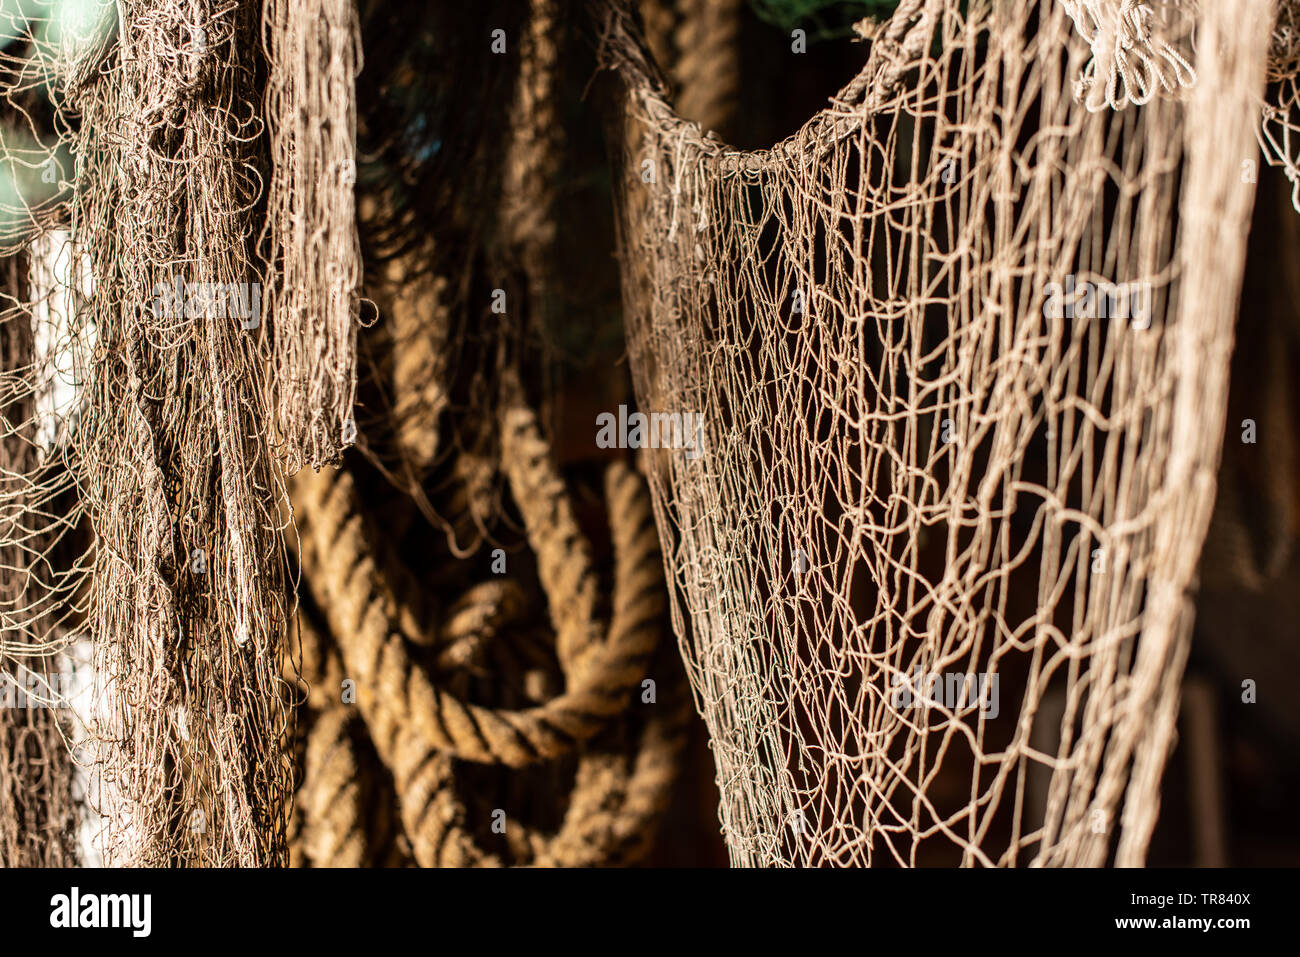 https://c8.alamy.com/comp/TR840X/vintage-ropes-and-nets-used-in-fishing-a-long-time-ago-TR840X.jpg